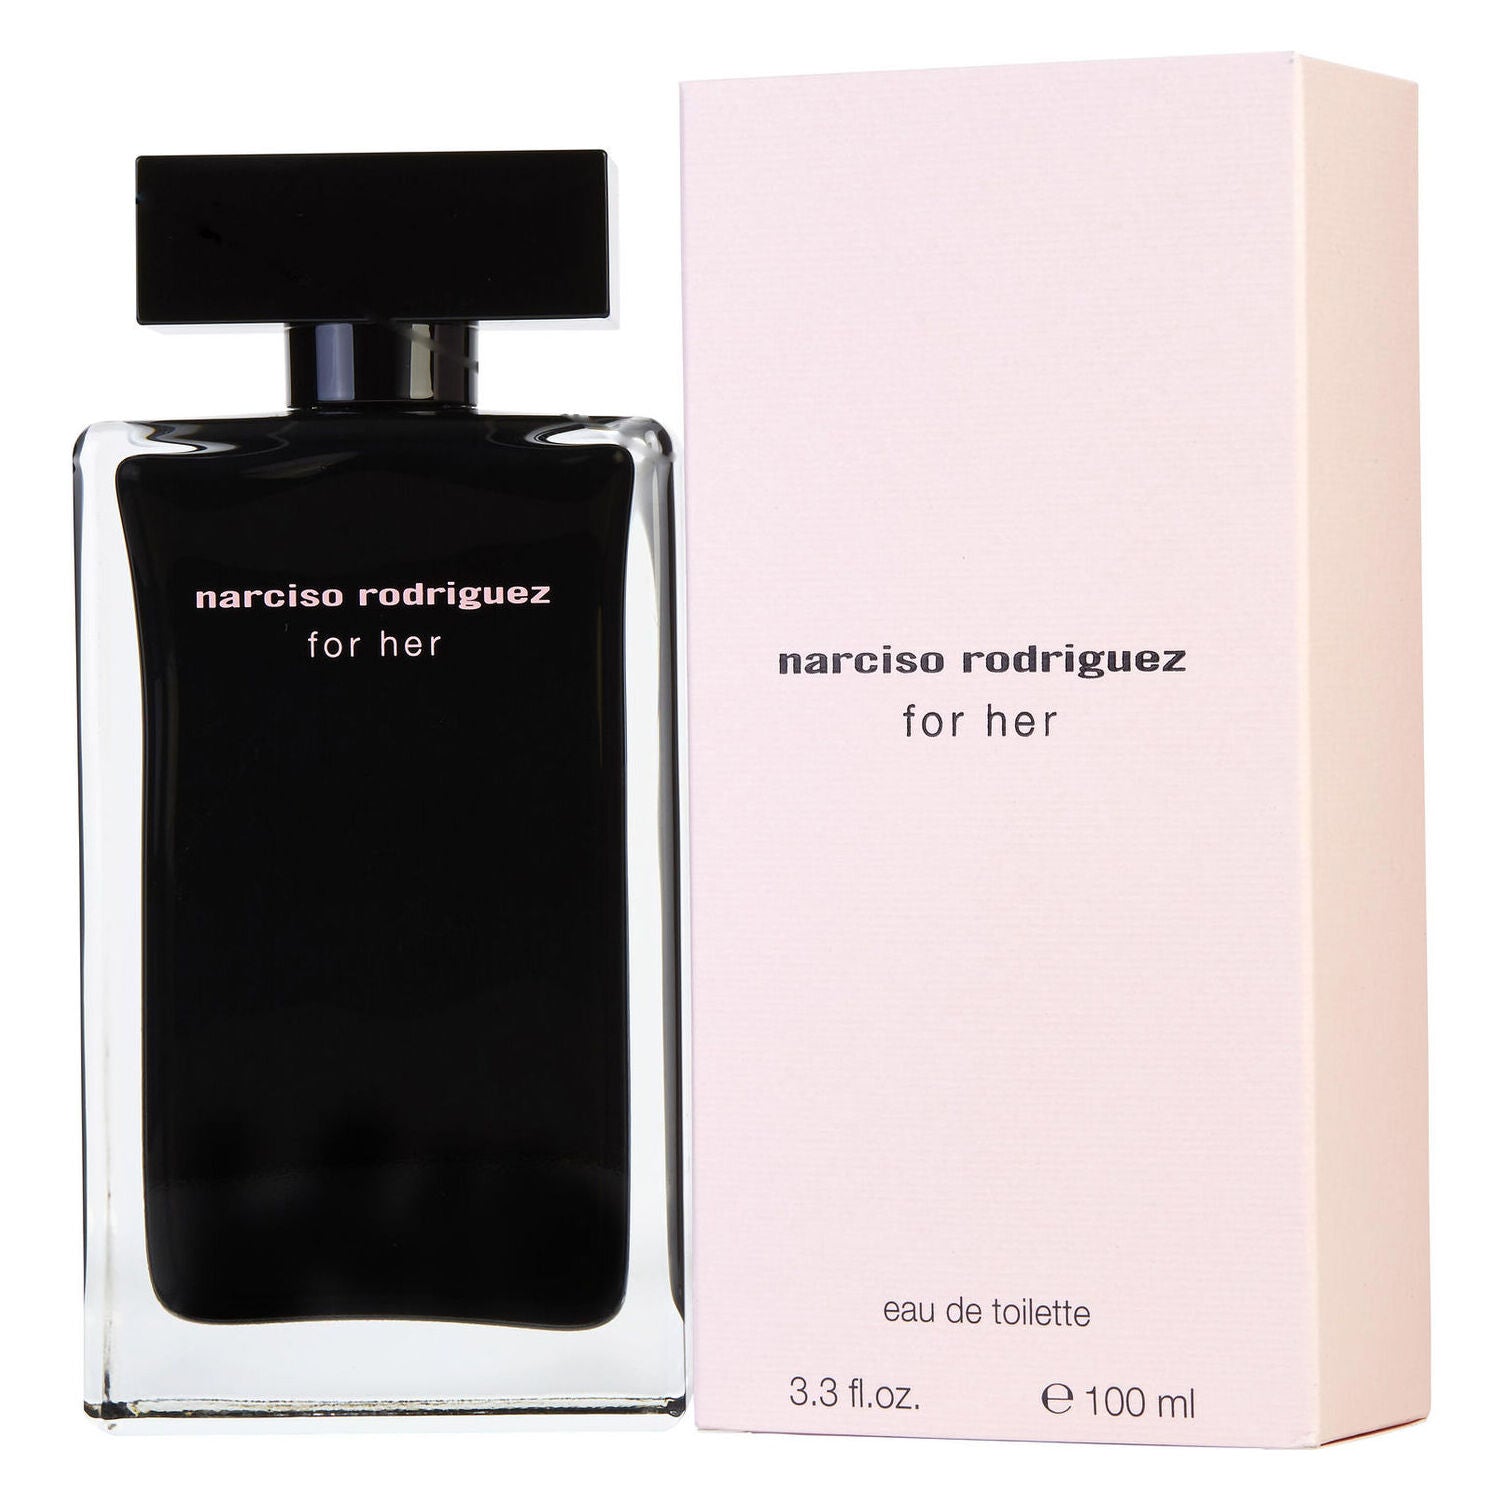 Narciso Rodriguez For Her by Narciso Rodriguez 3.3 oz EDT Spray for Women